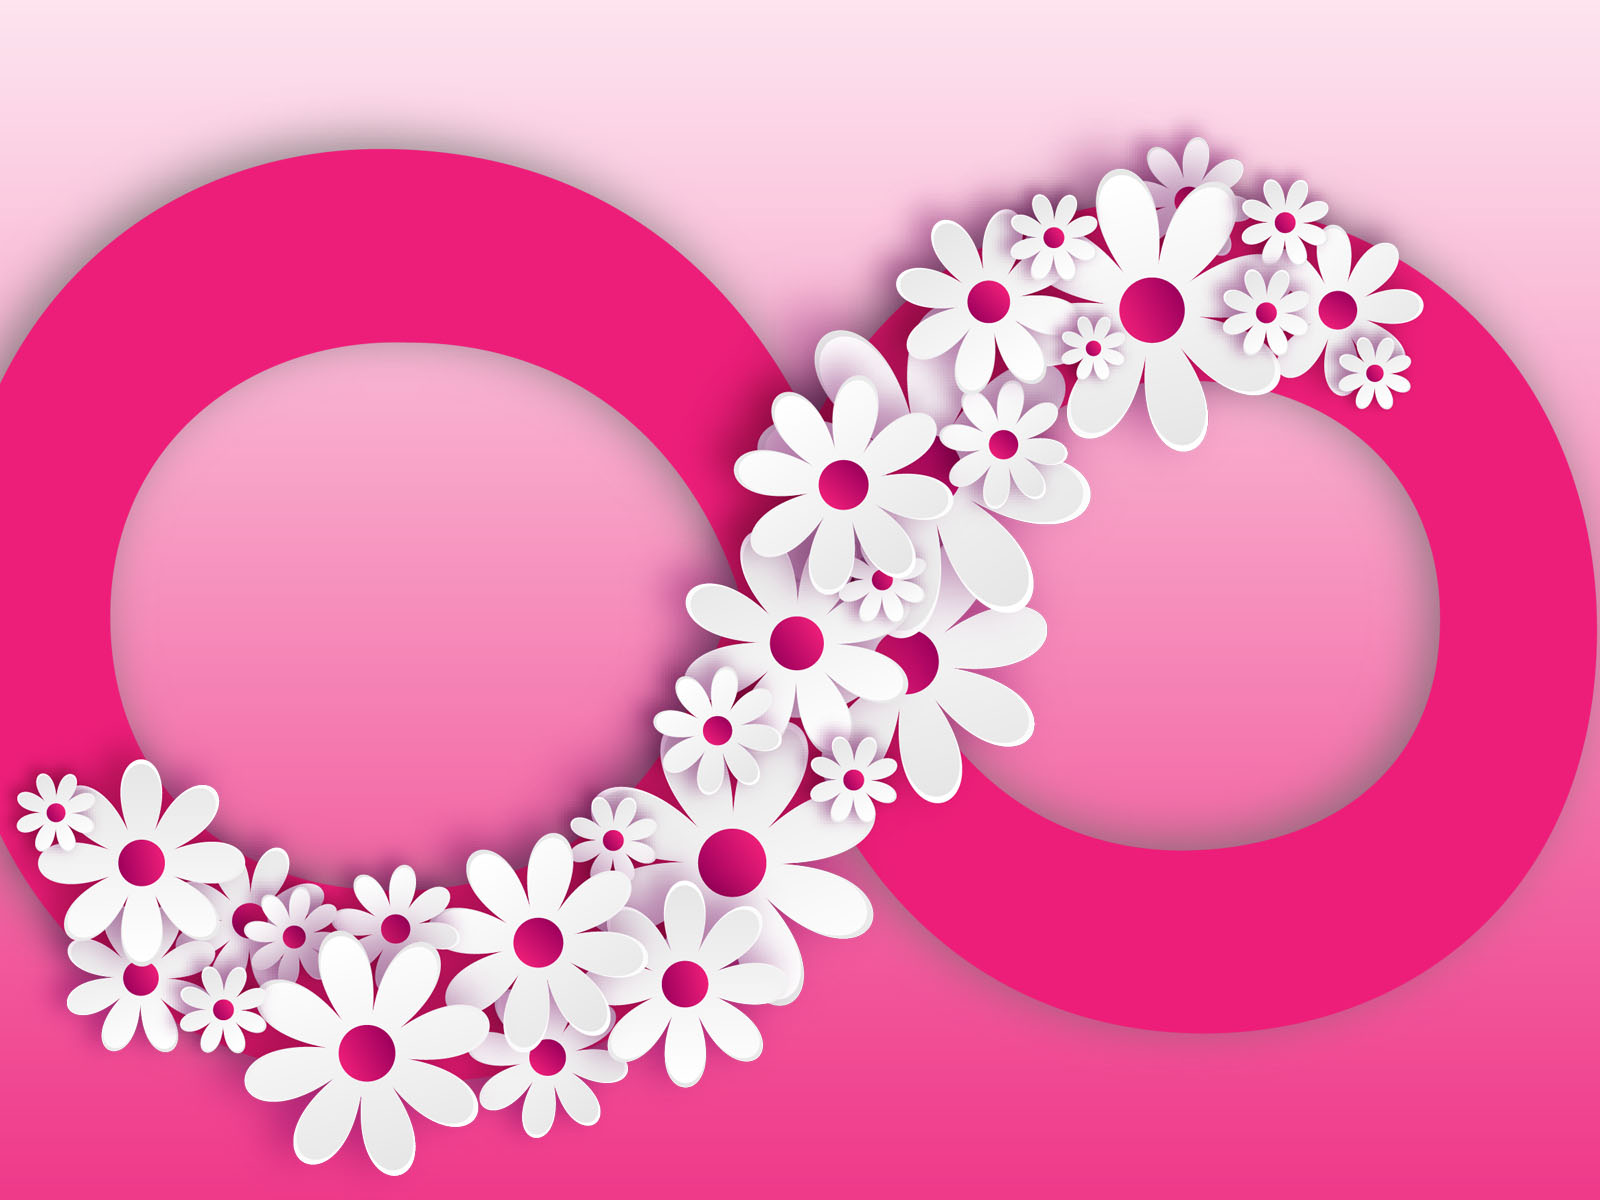 Endless Flower PPT Backgrounds